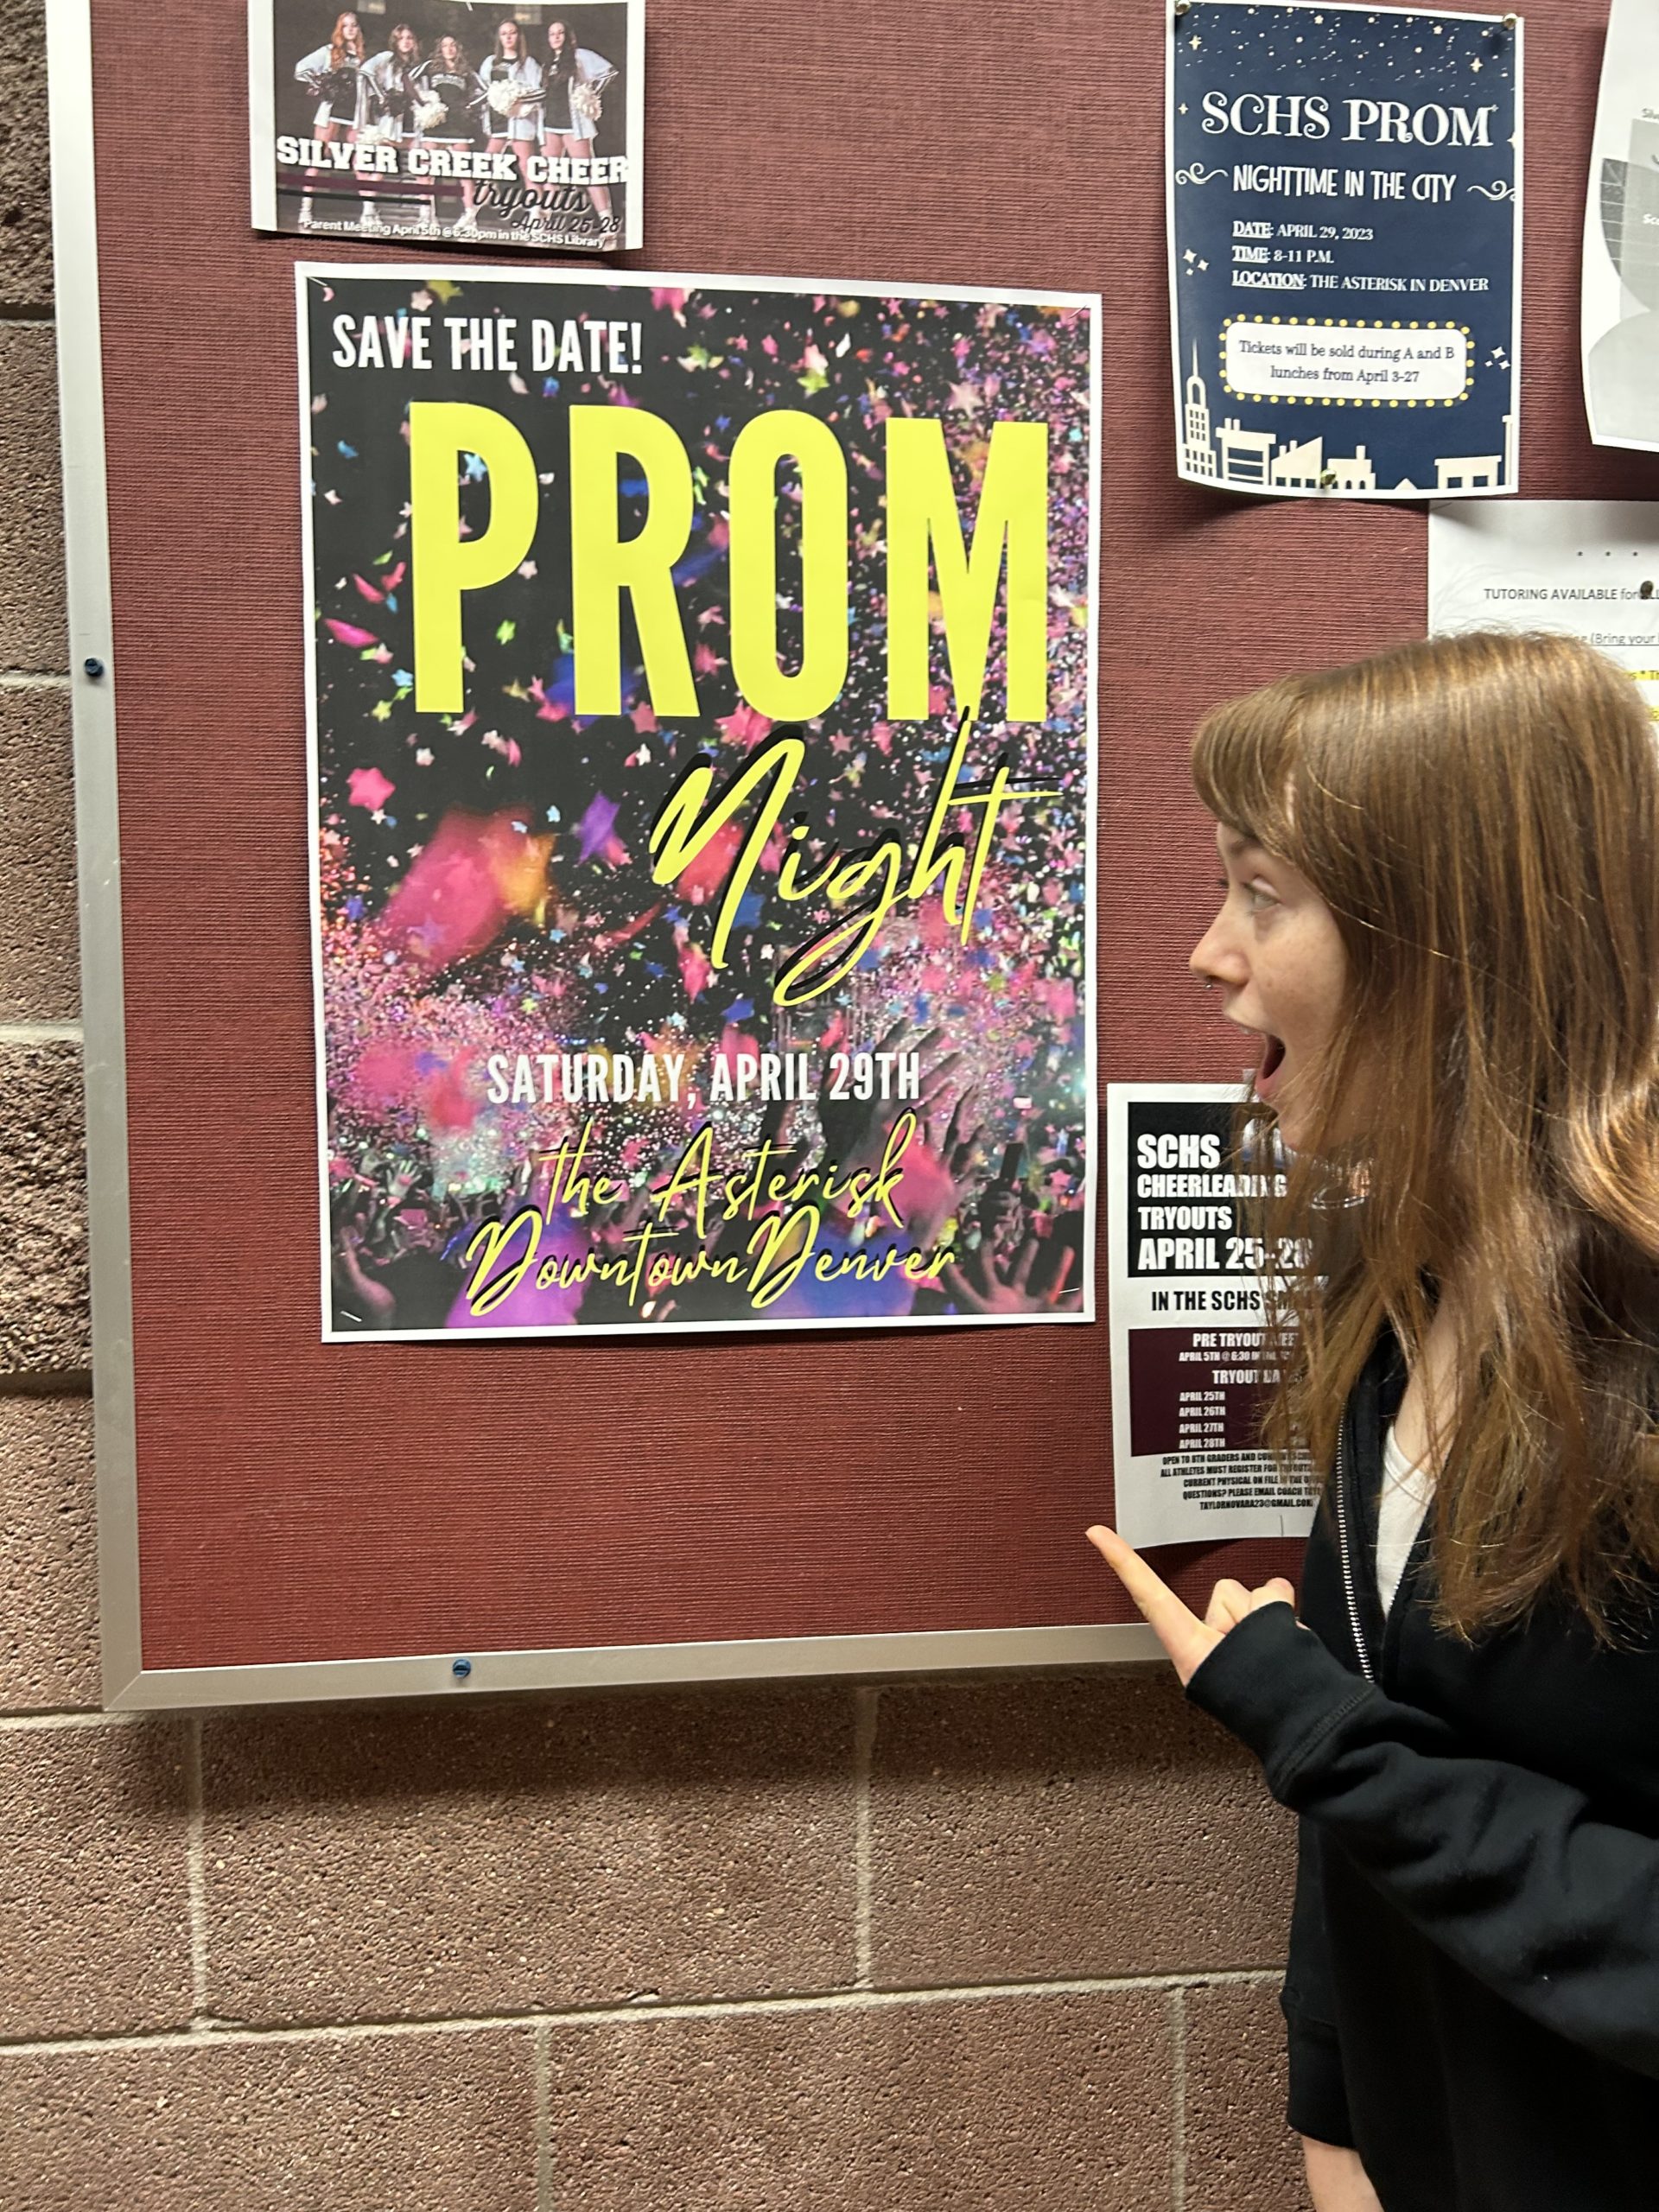 Senior, Lena Byrne reads the prom poster and gets excited for a magical night!